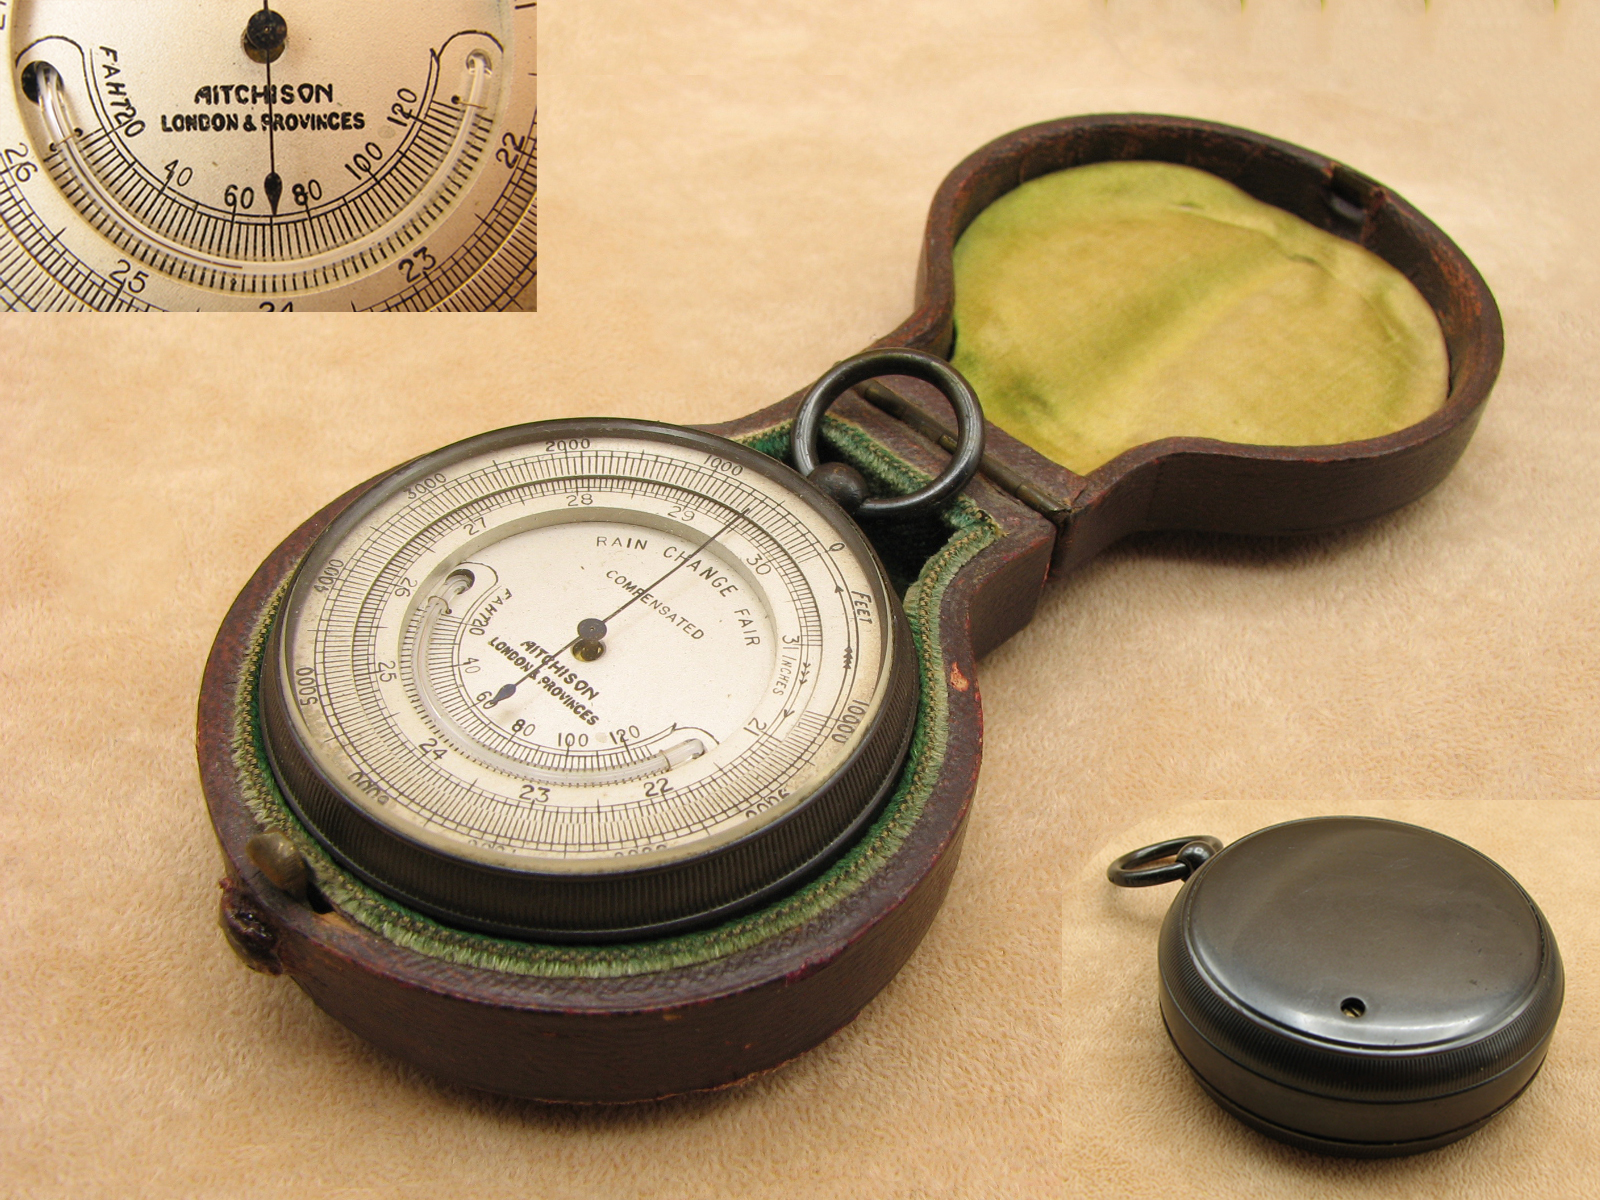 Antique pocket barometer with curved thermometer signed Aitchison London & Provinces